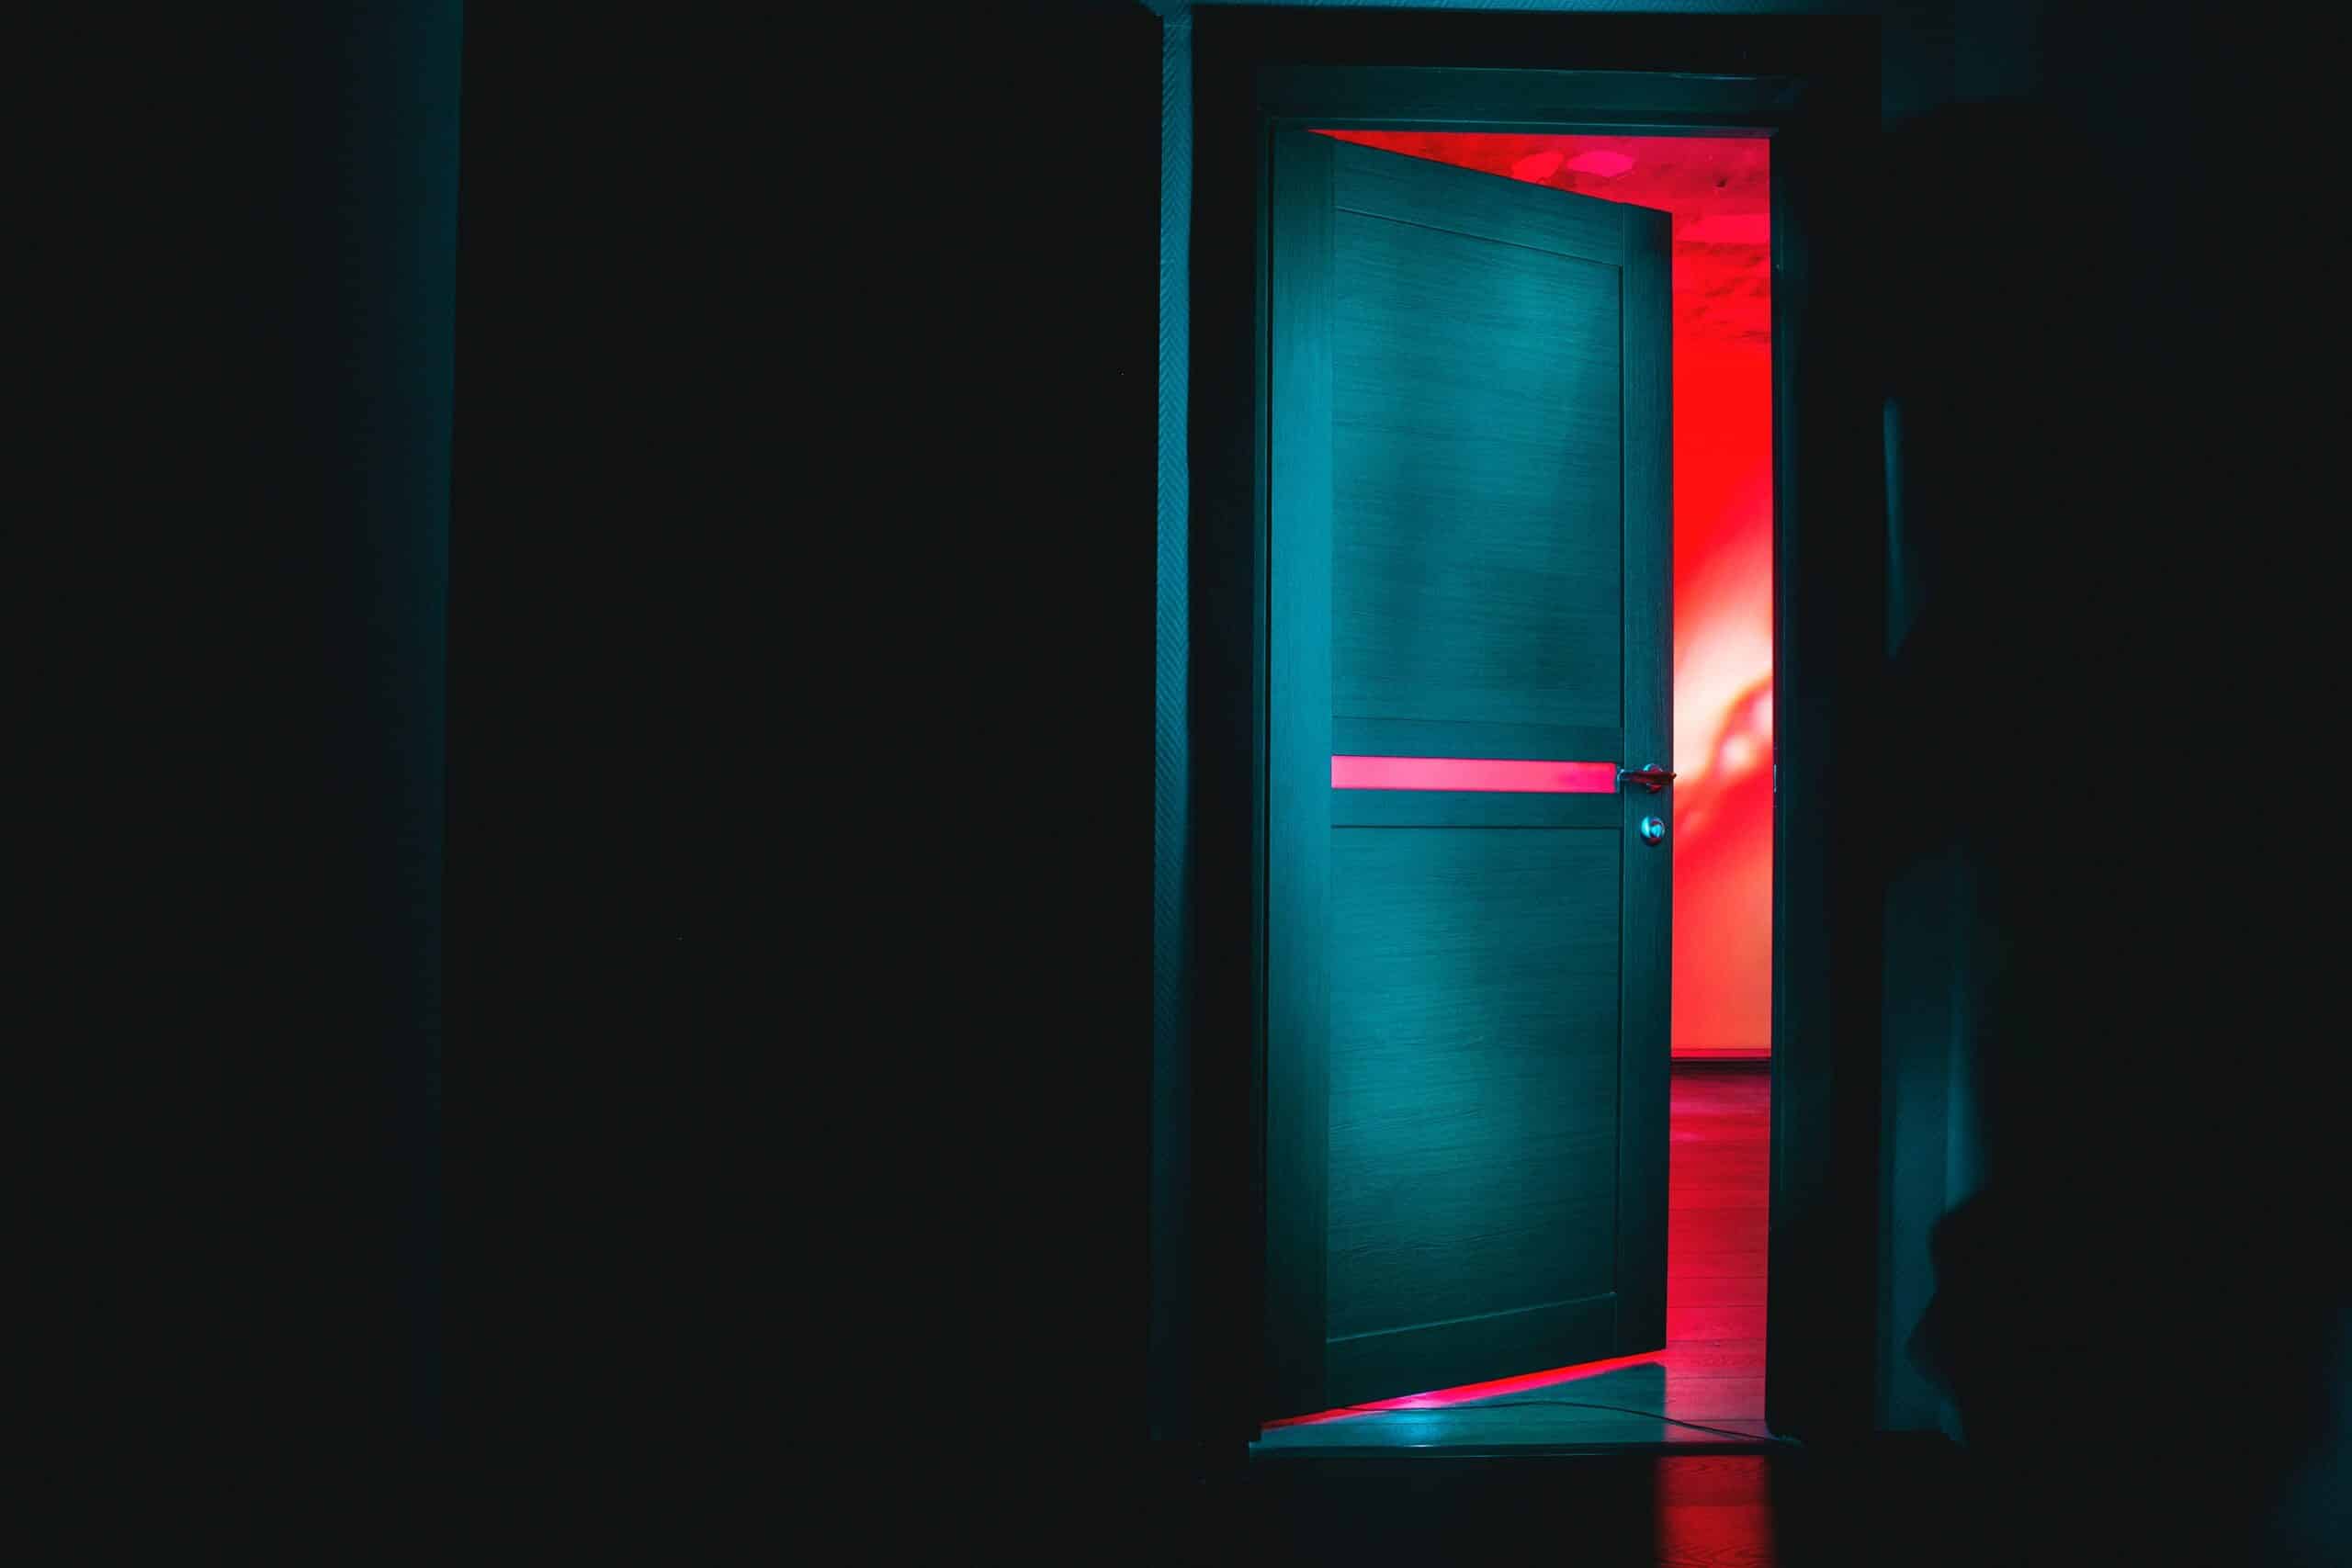 Door slightly ajar in dark room with ominous red glow emanating from the other side